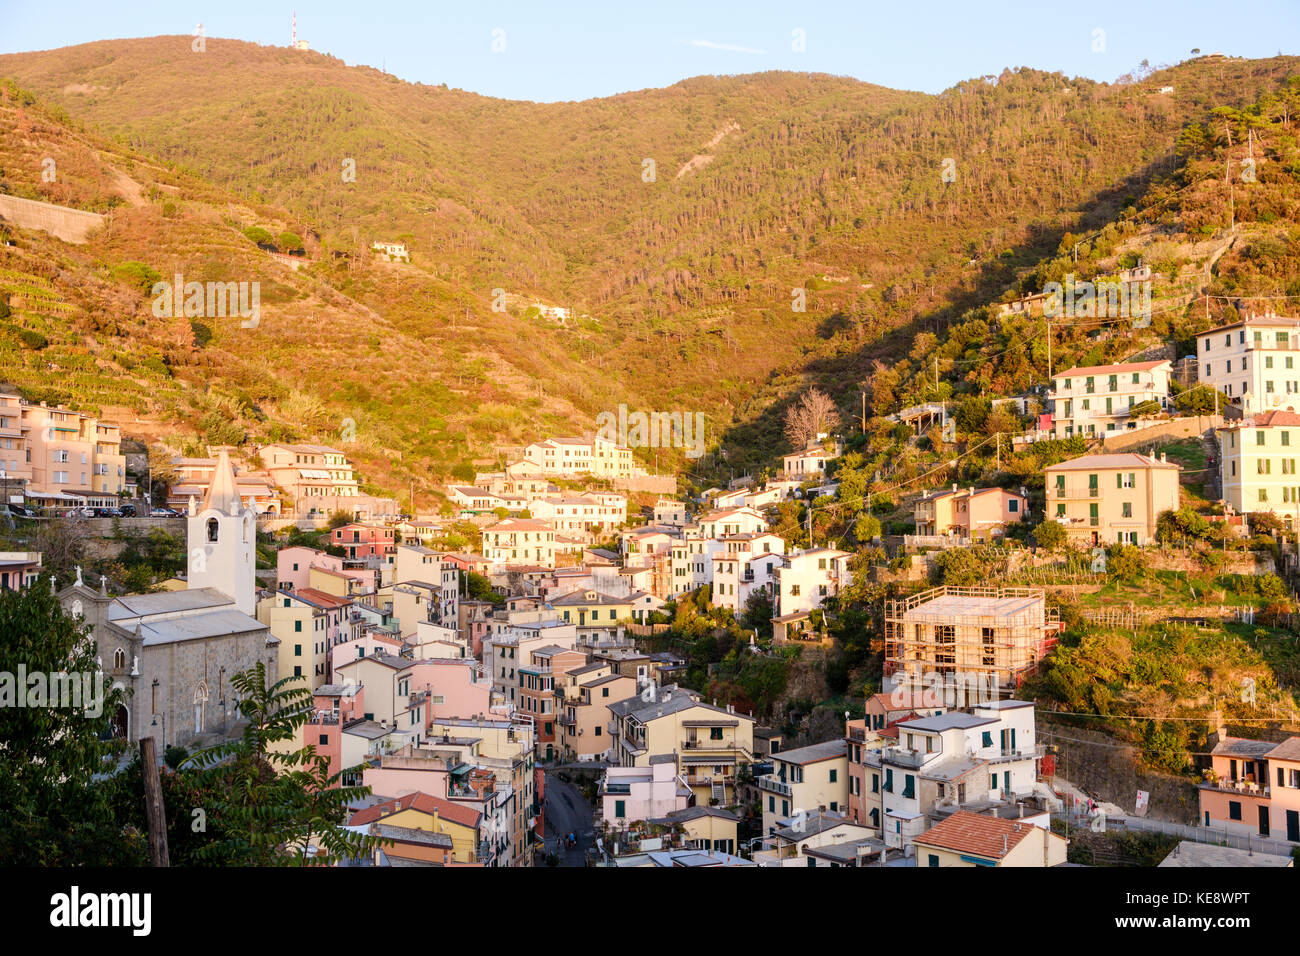 view over the town with its colourful houses in Riomaggiore, Cinque Terre, Liguria, Italy Stock Photo